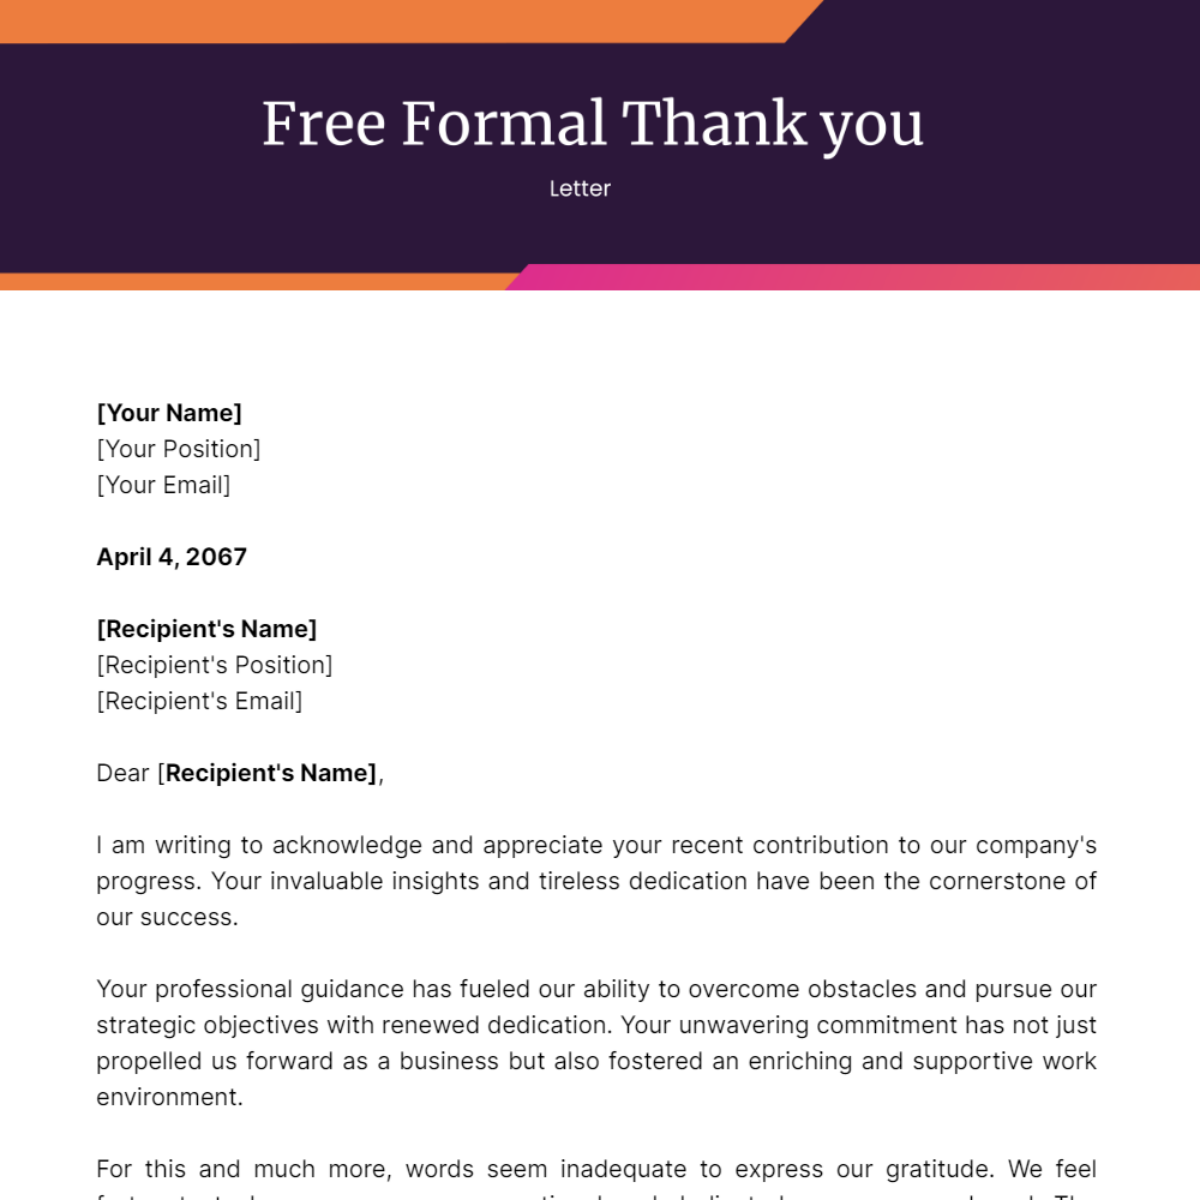 Formal Thank you Letter Template